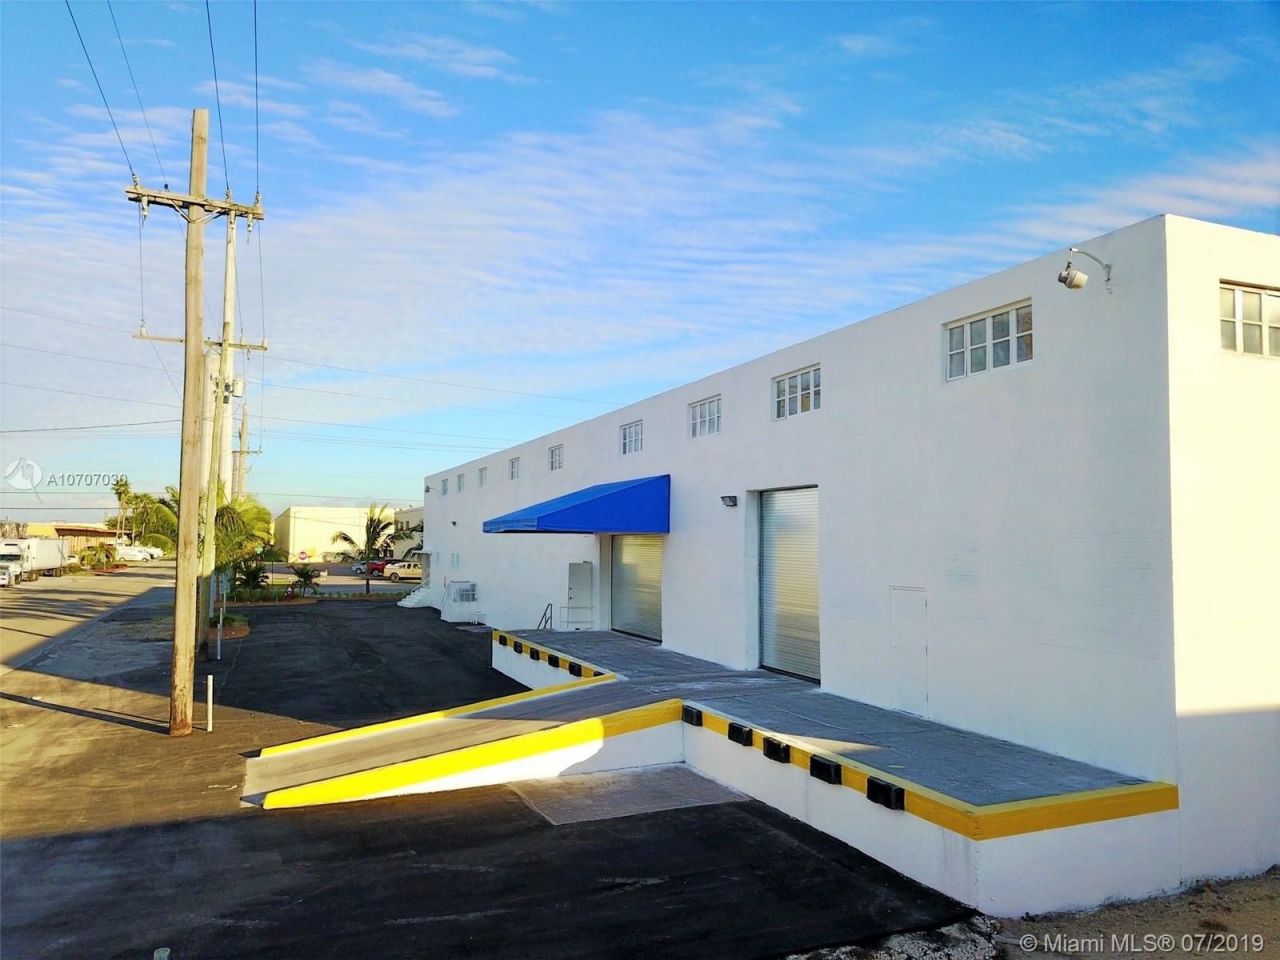 Commercial property in Miami, USA, 4 000 sq.m - picture 1